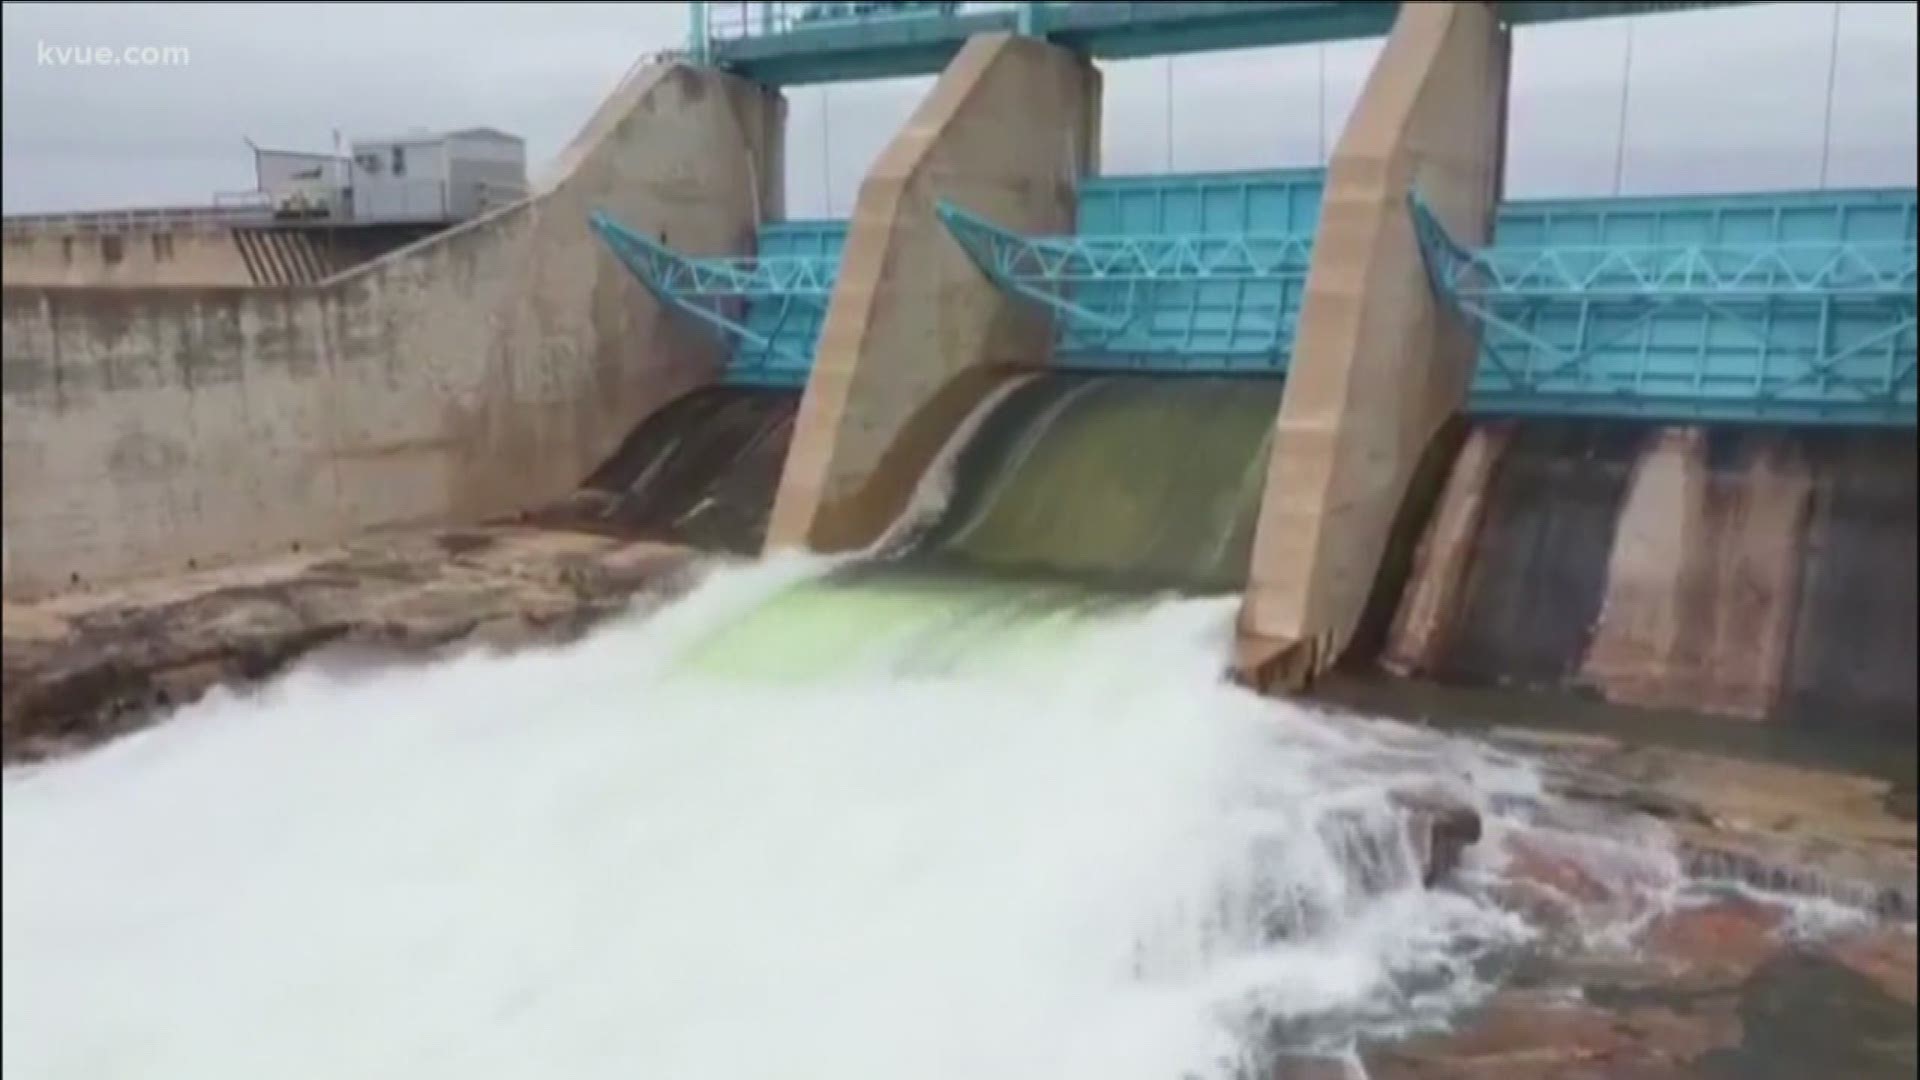 The Lower Colorado River Authority closed the open floodgates at Buchanan, Wirtz and Starcke dams Tuesday.